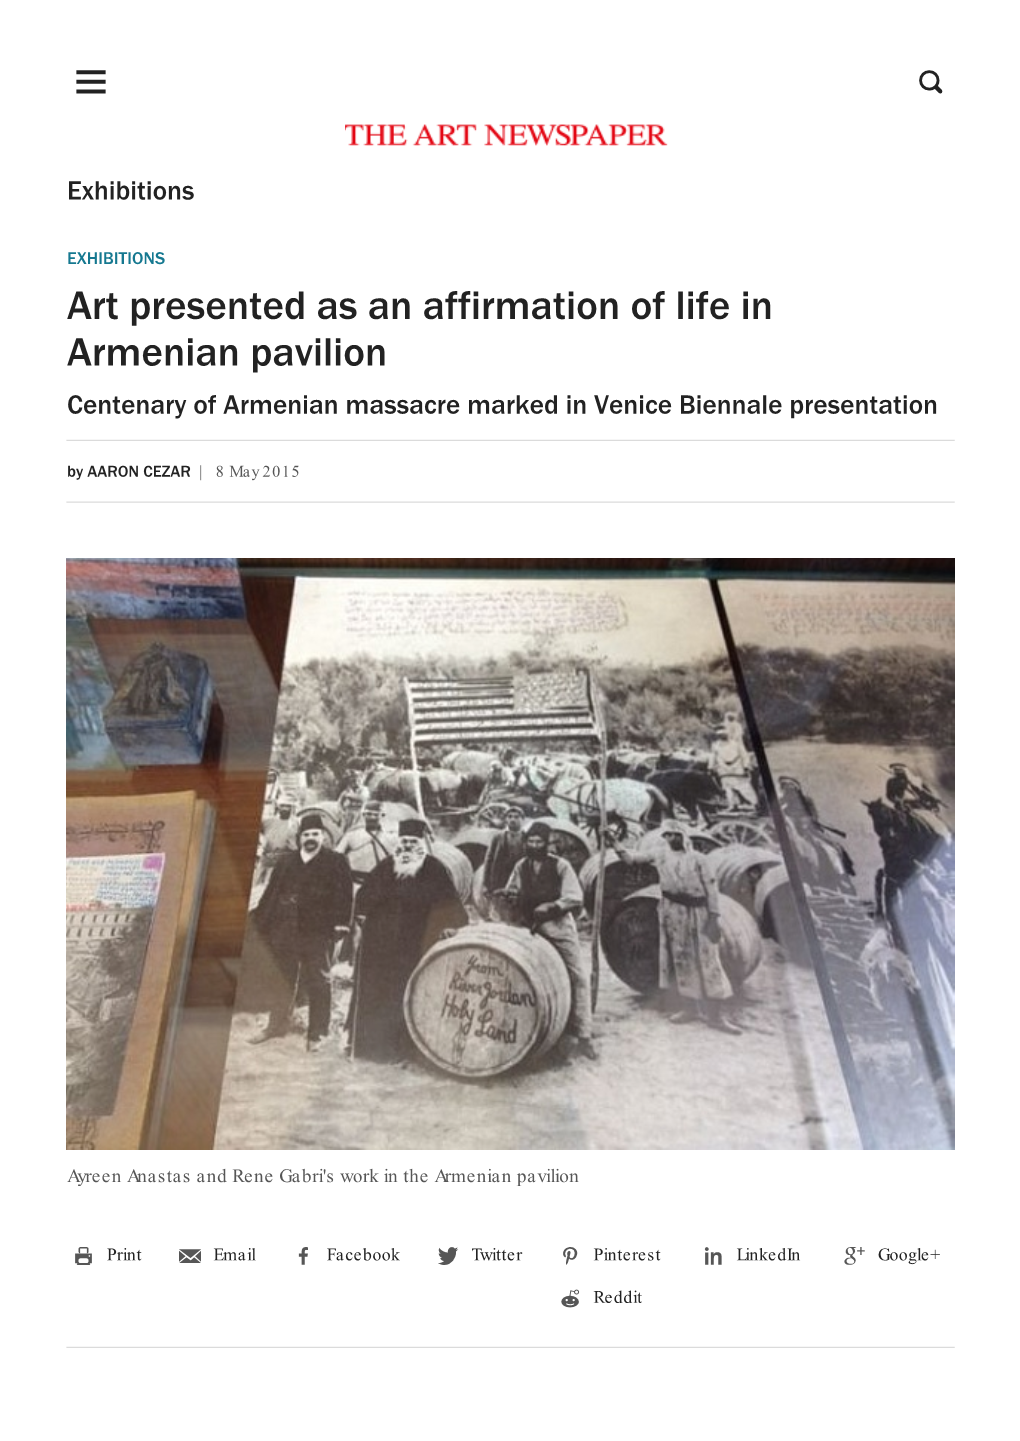 Art Presented As an Affirmation of Life in Armenian Pavilion